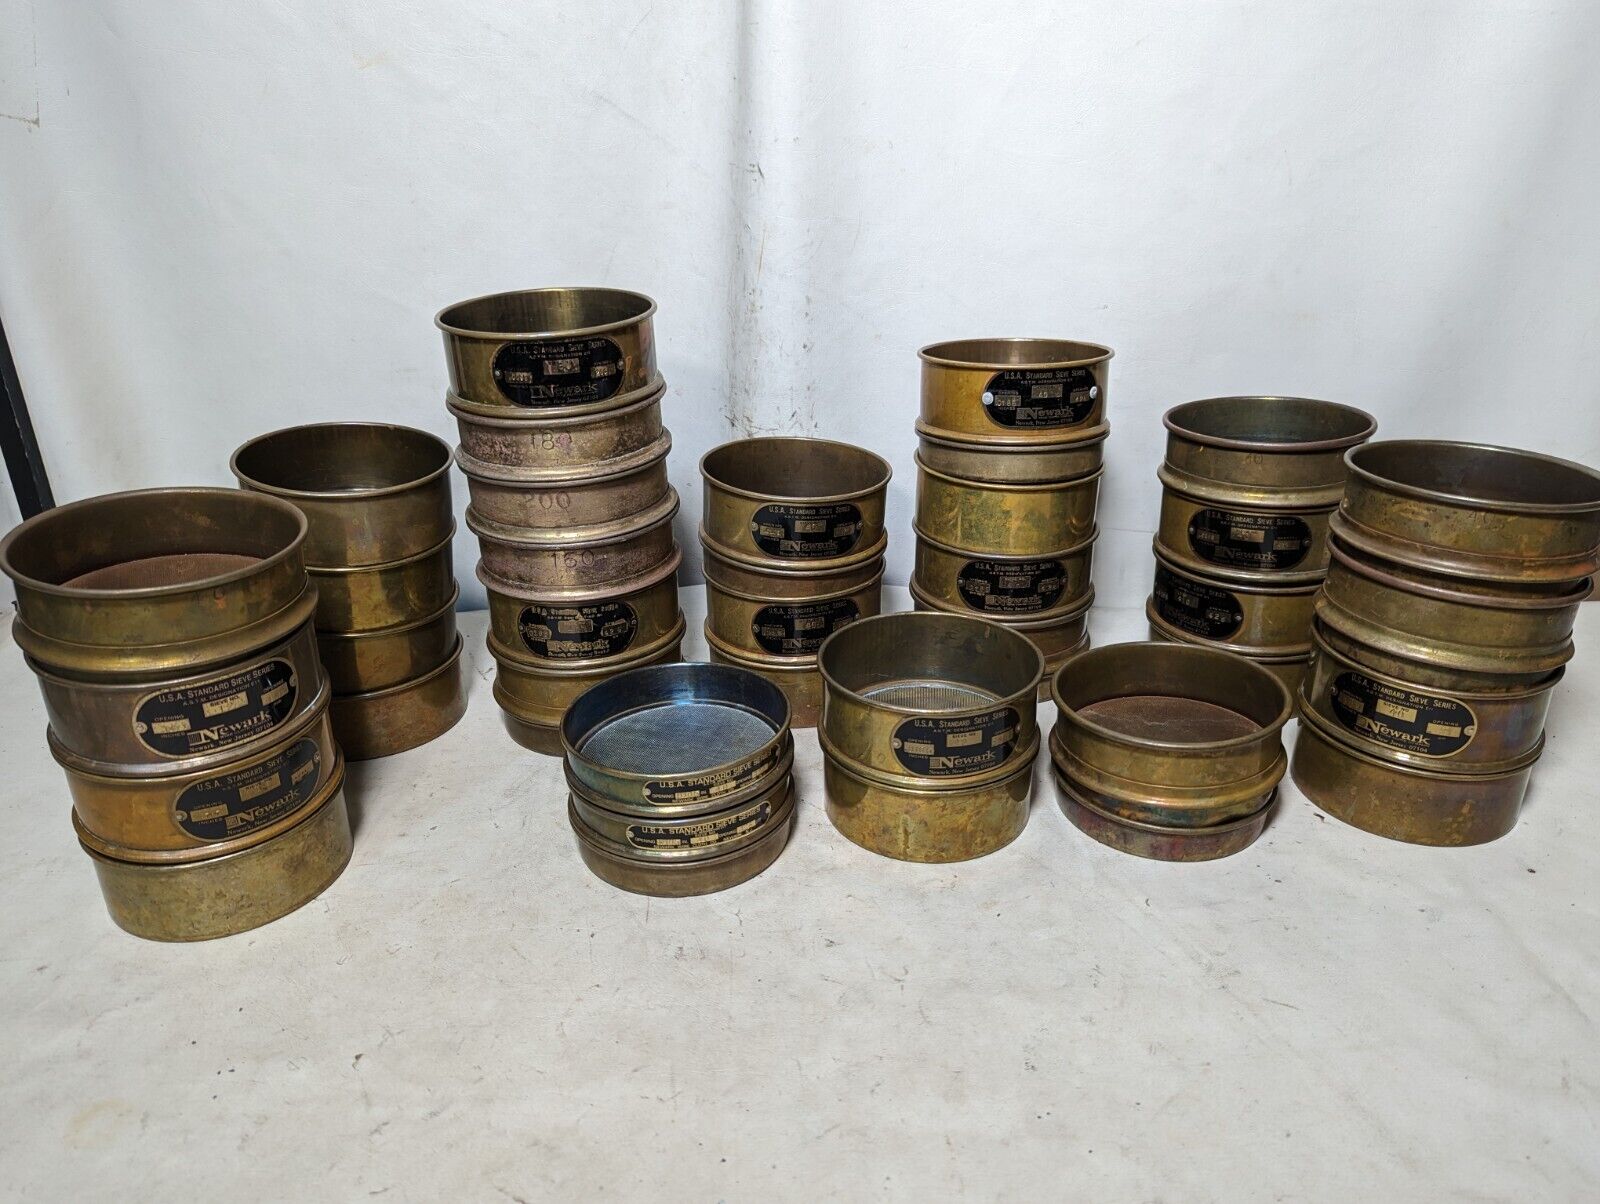 Lot of 37 vintage brass Newark sieves/cups/lids as pictured, USA standard sieve 